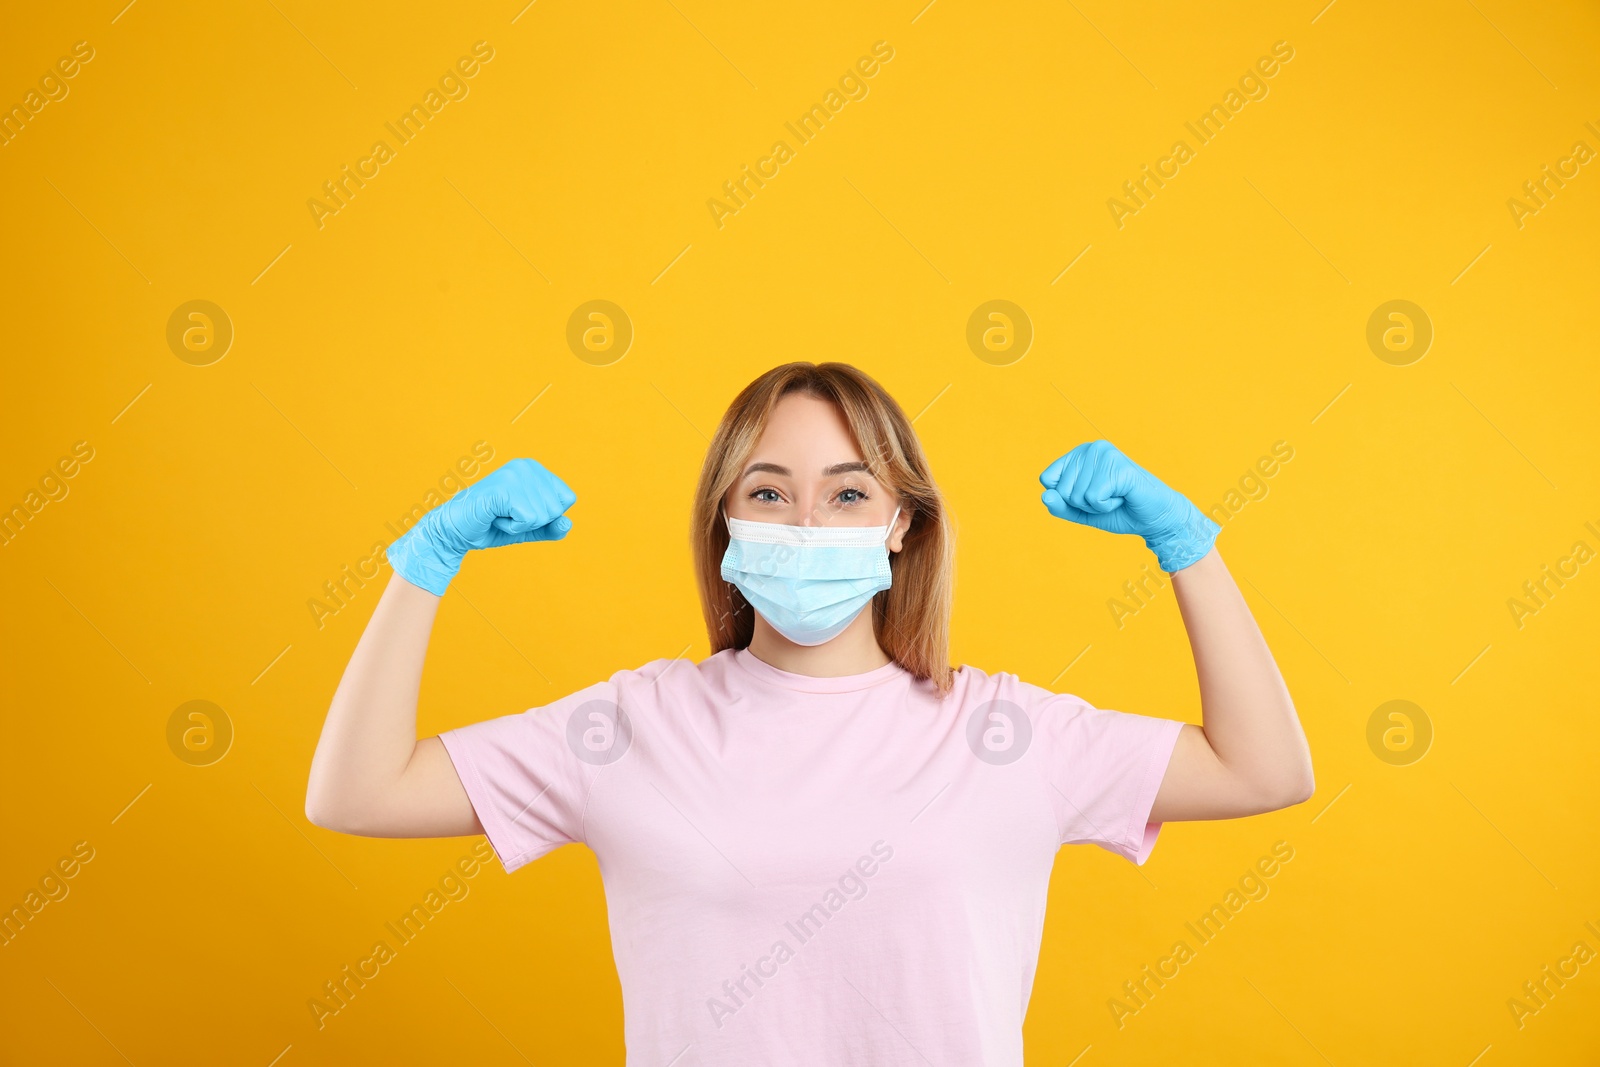 Photo of Woman with protective mask and gloves showing muscles on yellow background. Strong immunity concept